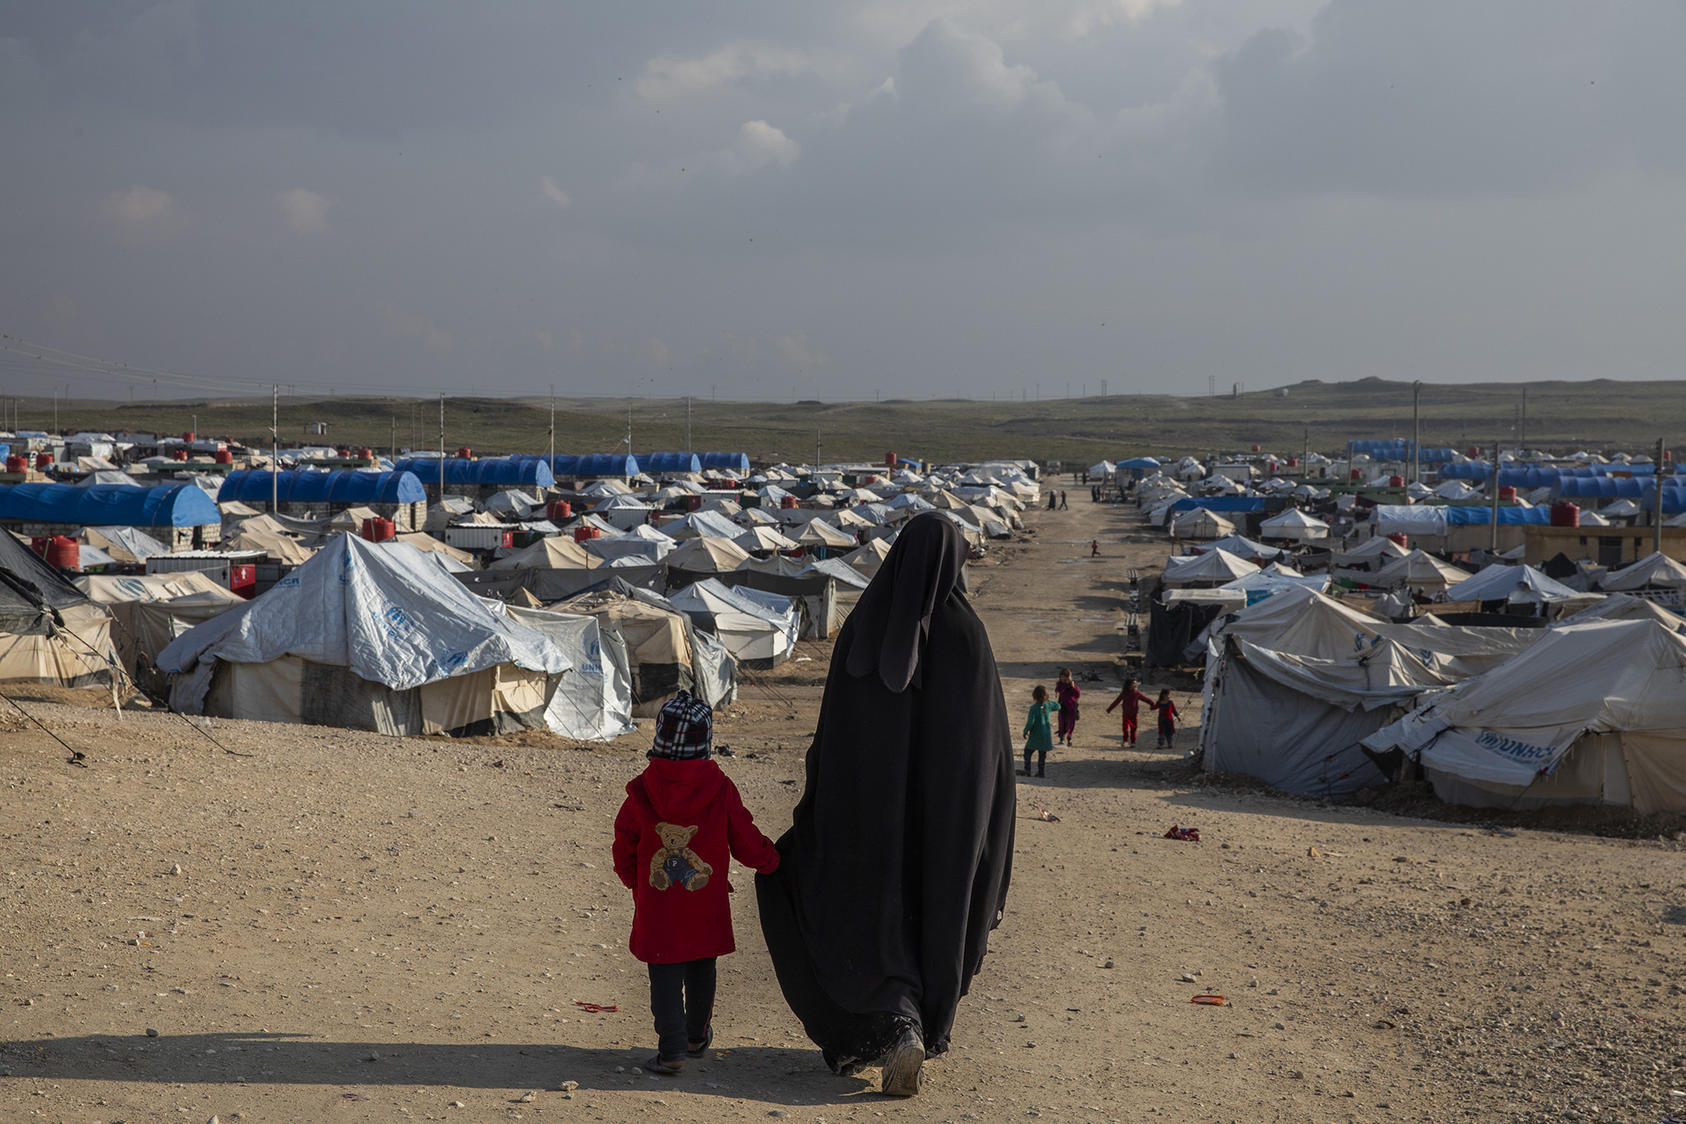 The Al-Hawl refugee camp in Syria, where many who have fled areas that were under control of ISIS are now kept, Feb. 17, 2019. Some countries want to strip ISIS volunteers of their citizenship. (Ivor Prickett/The New York Times)